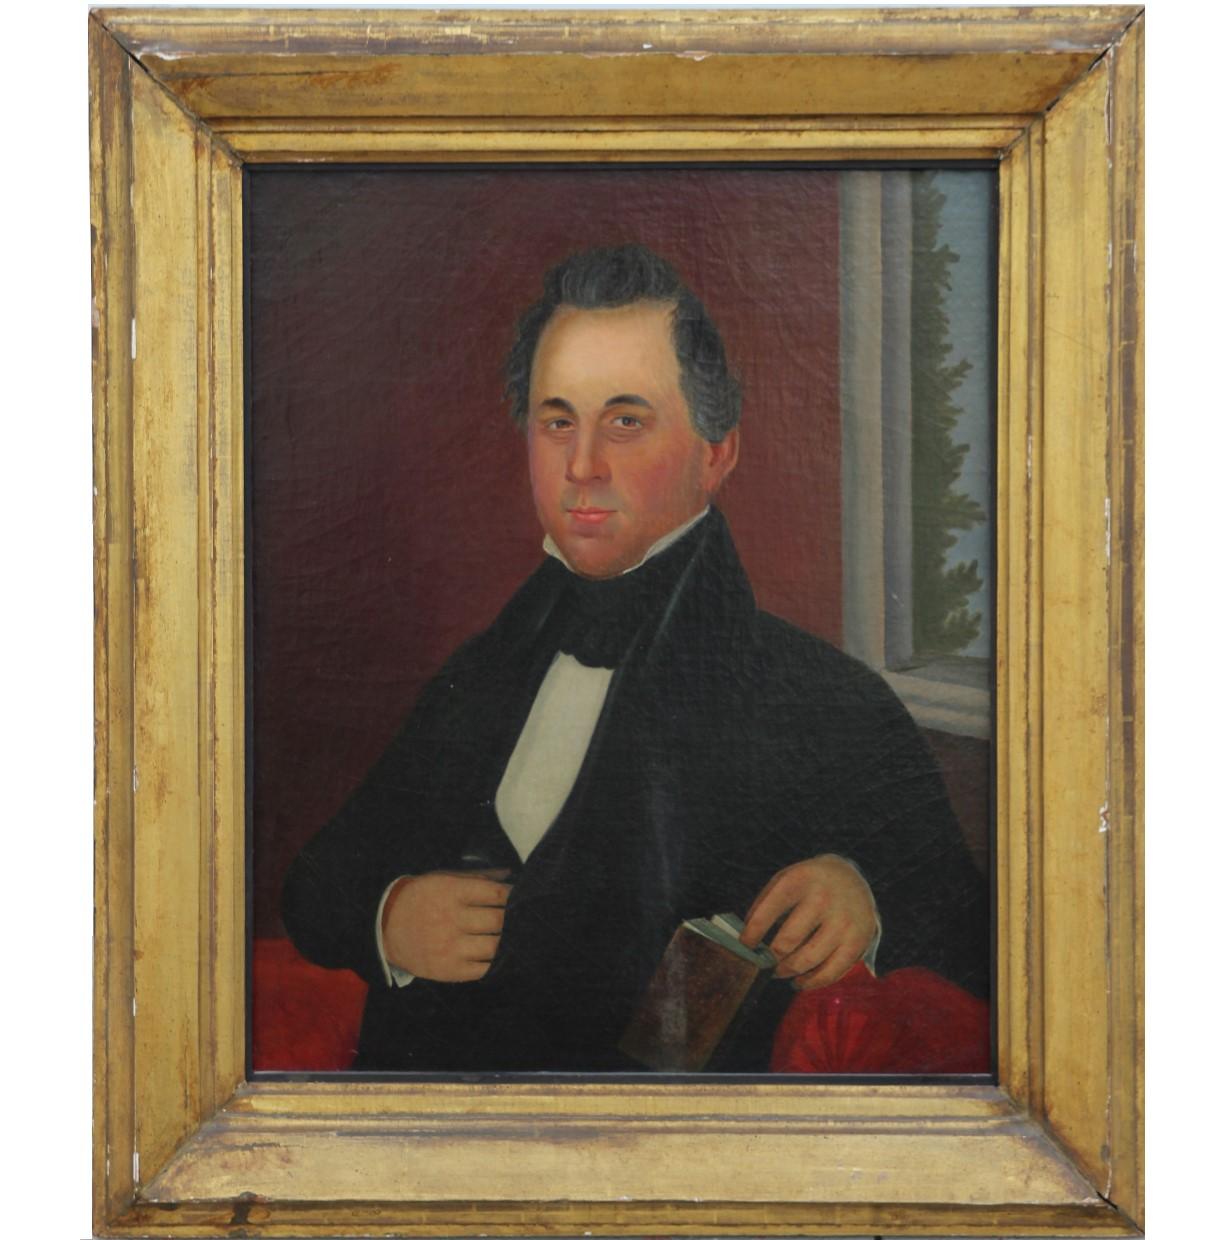 Unknown Portrait Painting - Early 19th Century American Portrait of a Man